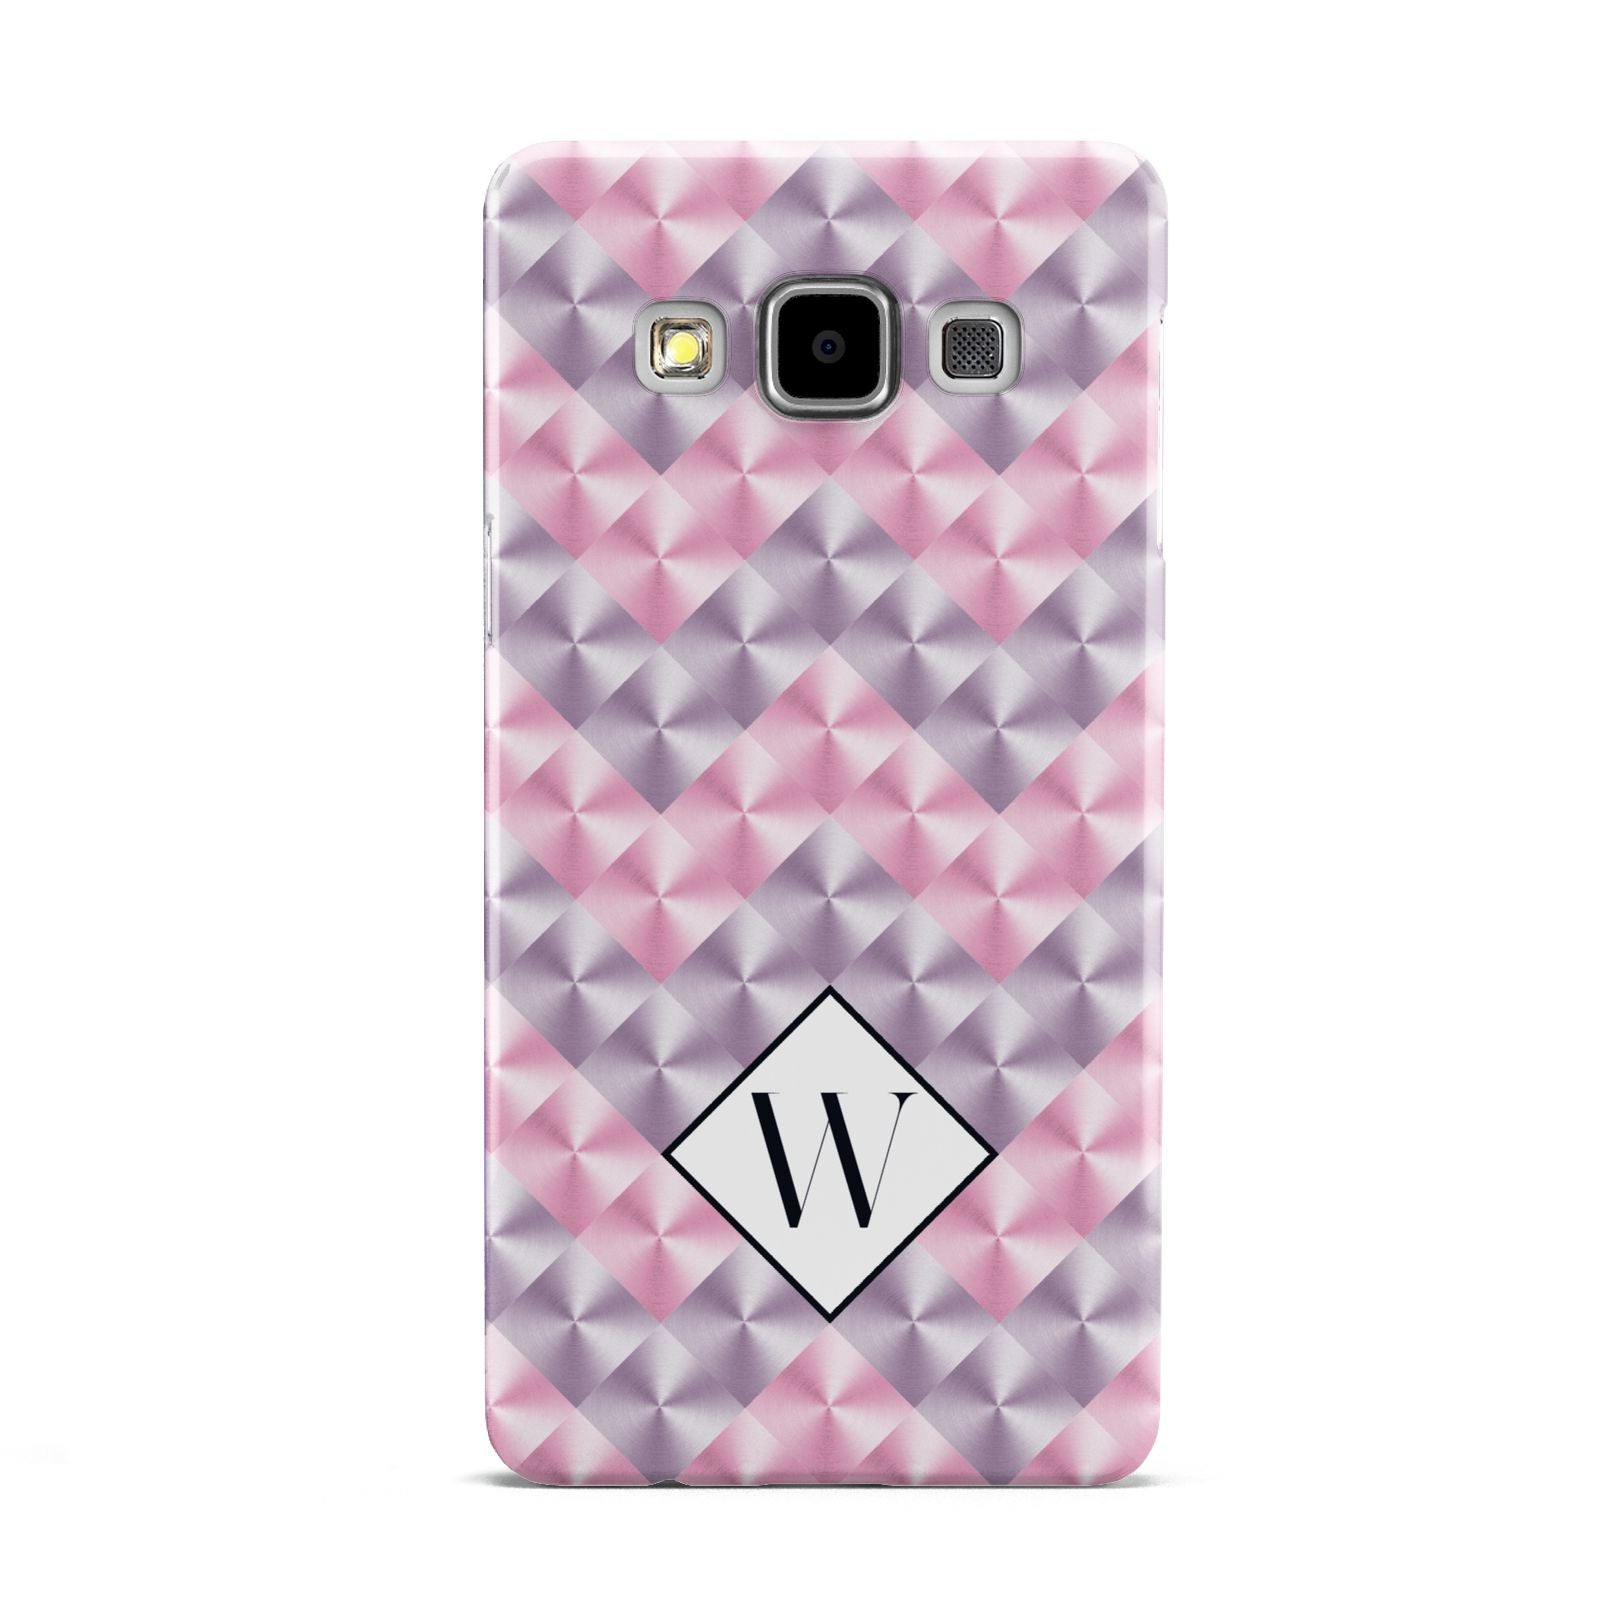 Personalised Mother Of Pearl Monogram Letter Samsung Galaxy A5 Case